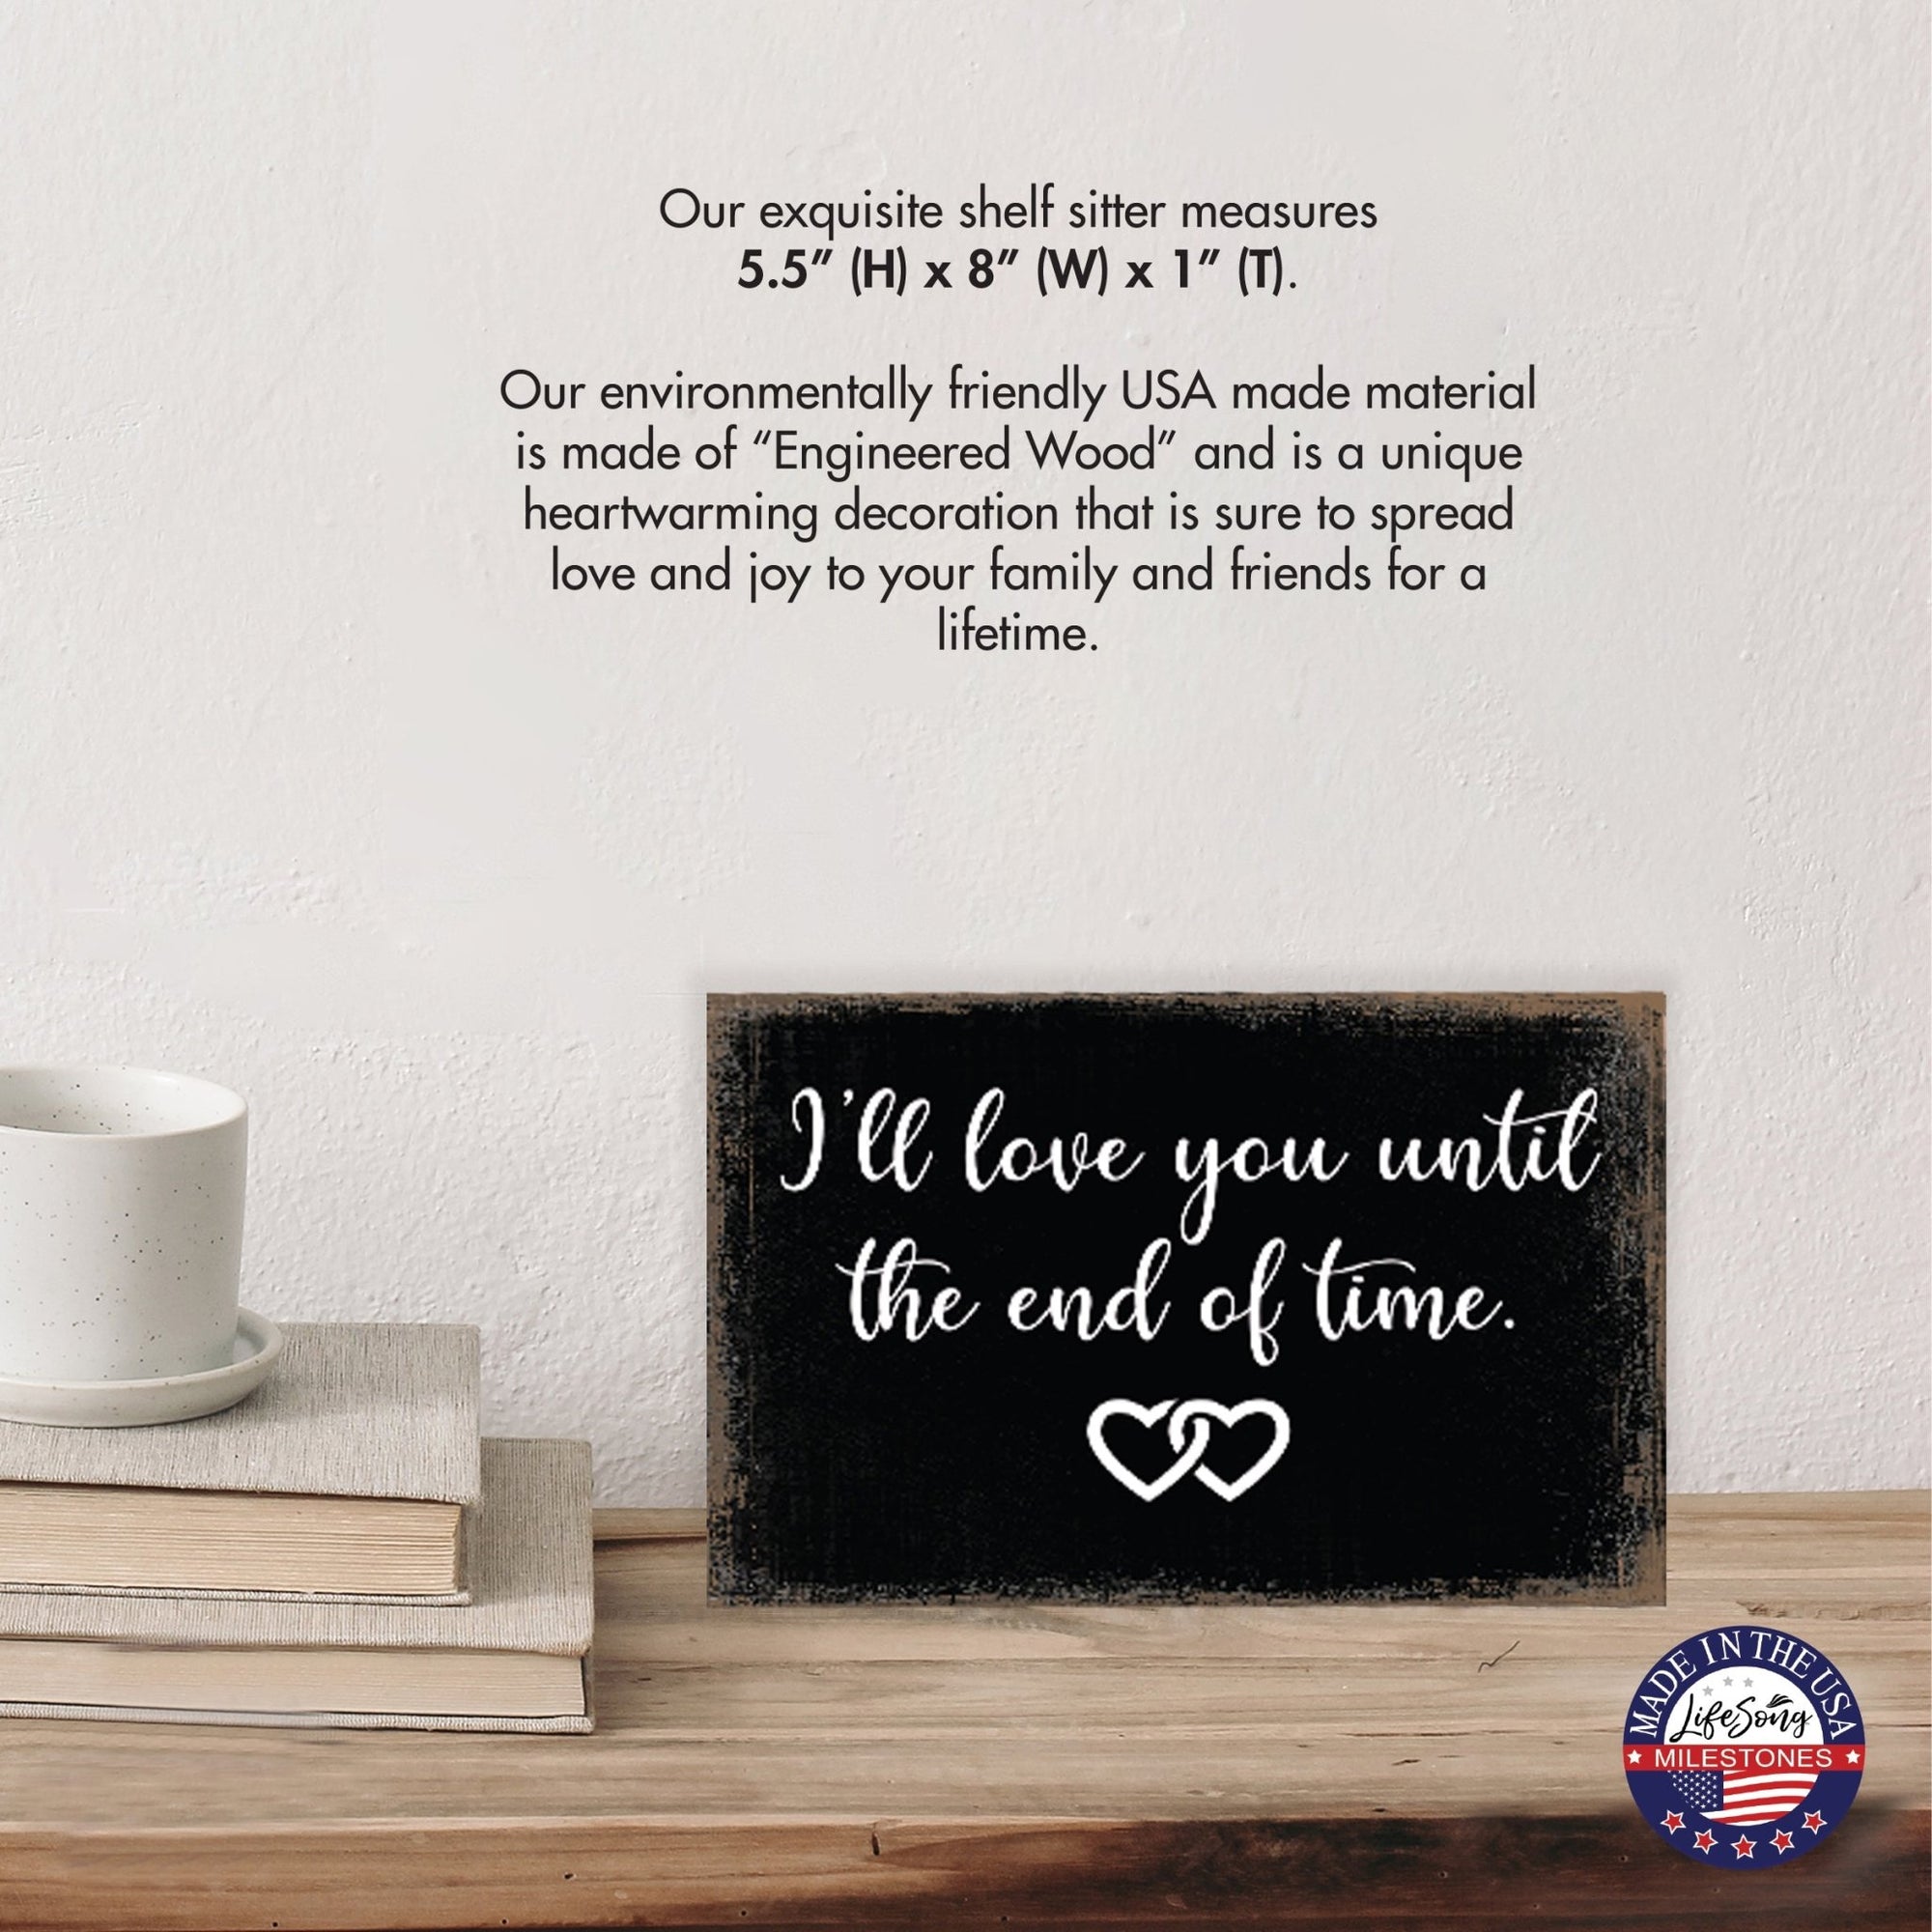 Unique Shelf Decor and Tabletop Signs for Wedding Anniversary Gift for Couples - Until The End of Time - LifeSong Milestones